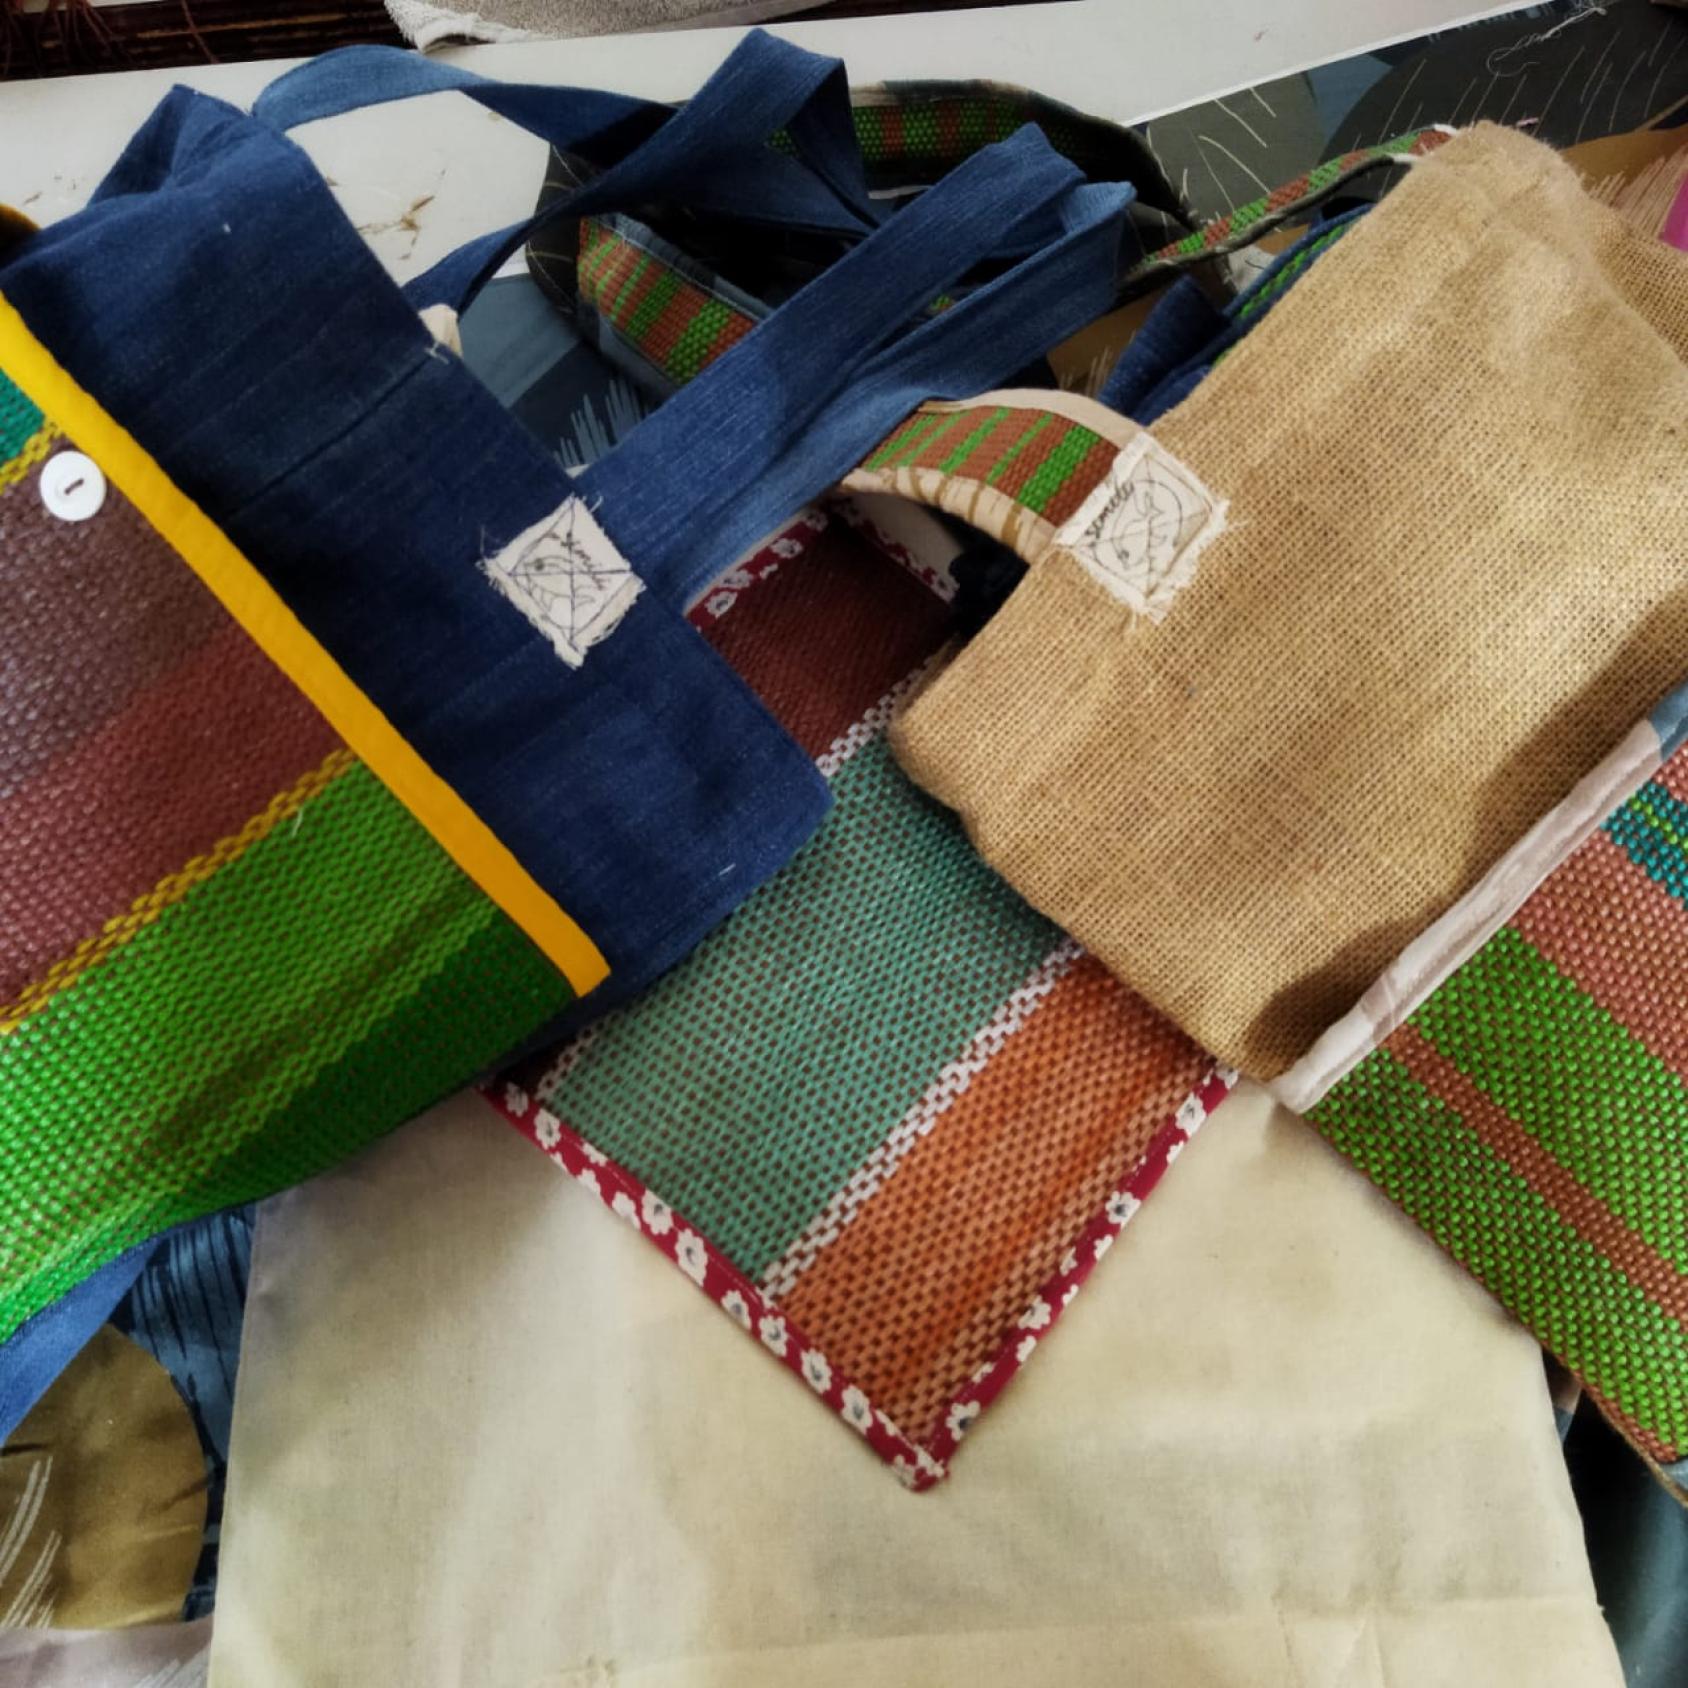 A collection of colorful handcrafted bags made from different fabrics. The bags feature a variety of textures and patterns, including stripes and checks. Some have additional details like buttons and embroidered patches. The image showcases the intricate workmanship and diversity in design of these fabric bags, highlighting the artistry in textile crafts.